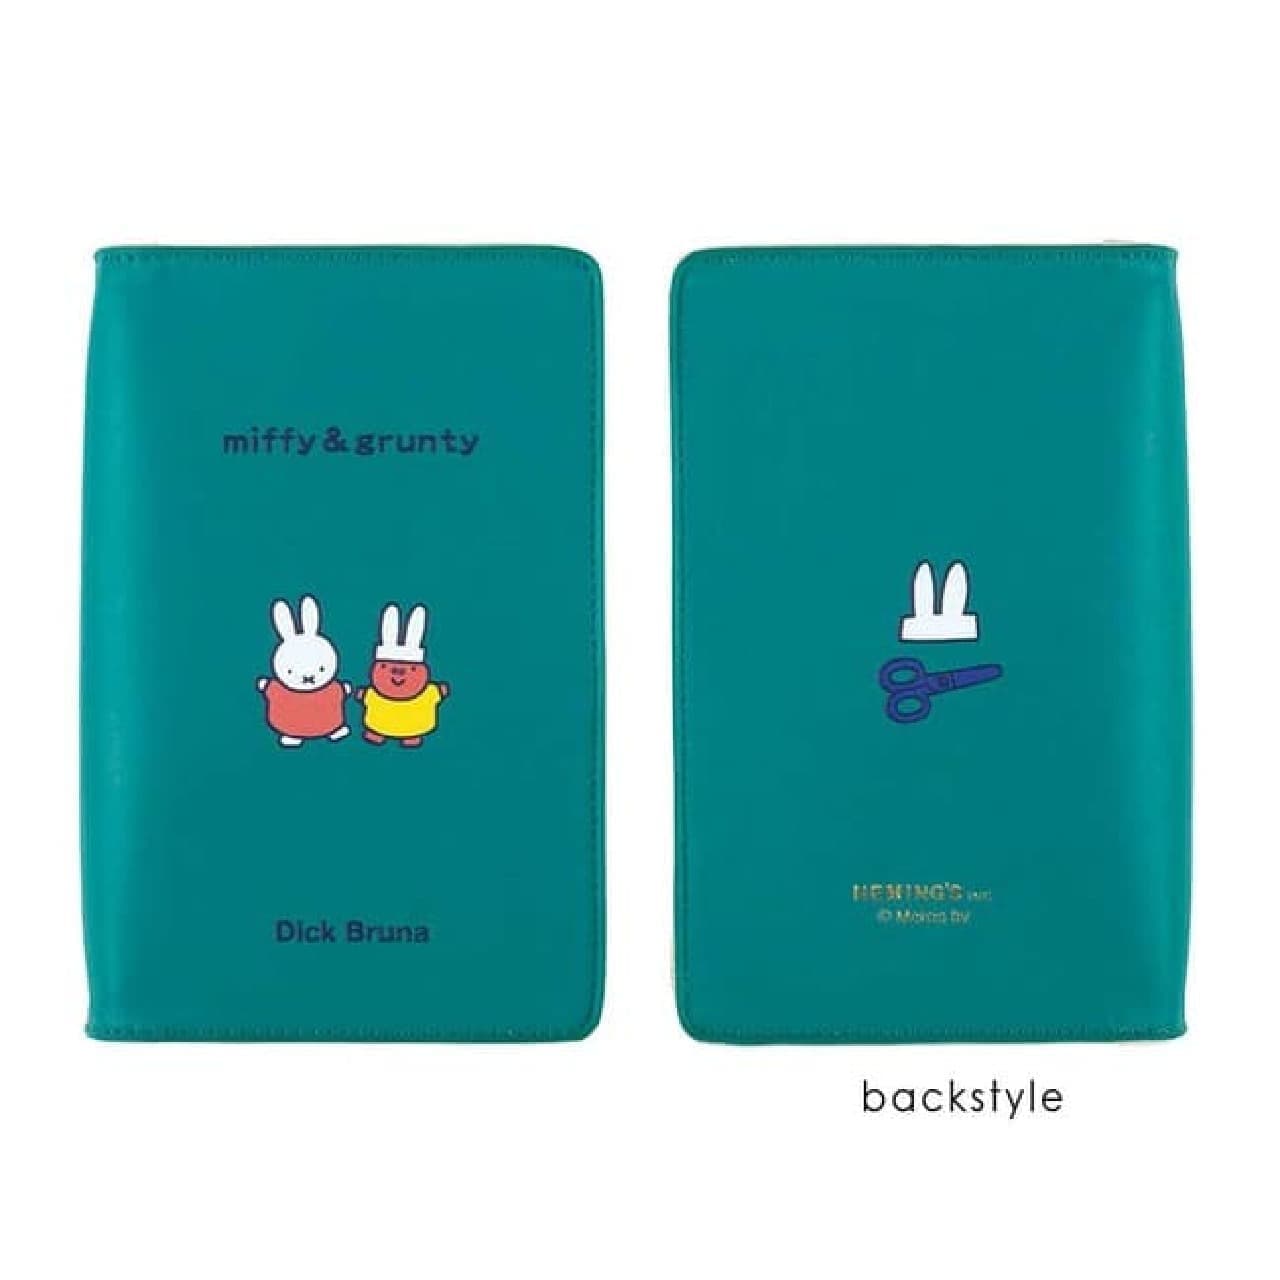 "Libre Pouch Dick Bruna" From Hemmings --Miffy pattern book pouch! Easy to put in masks and sterilization goods